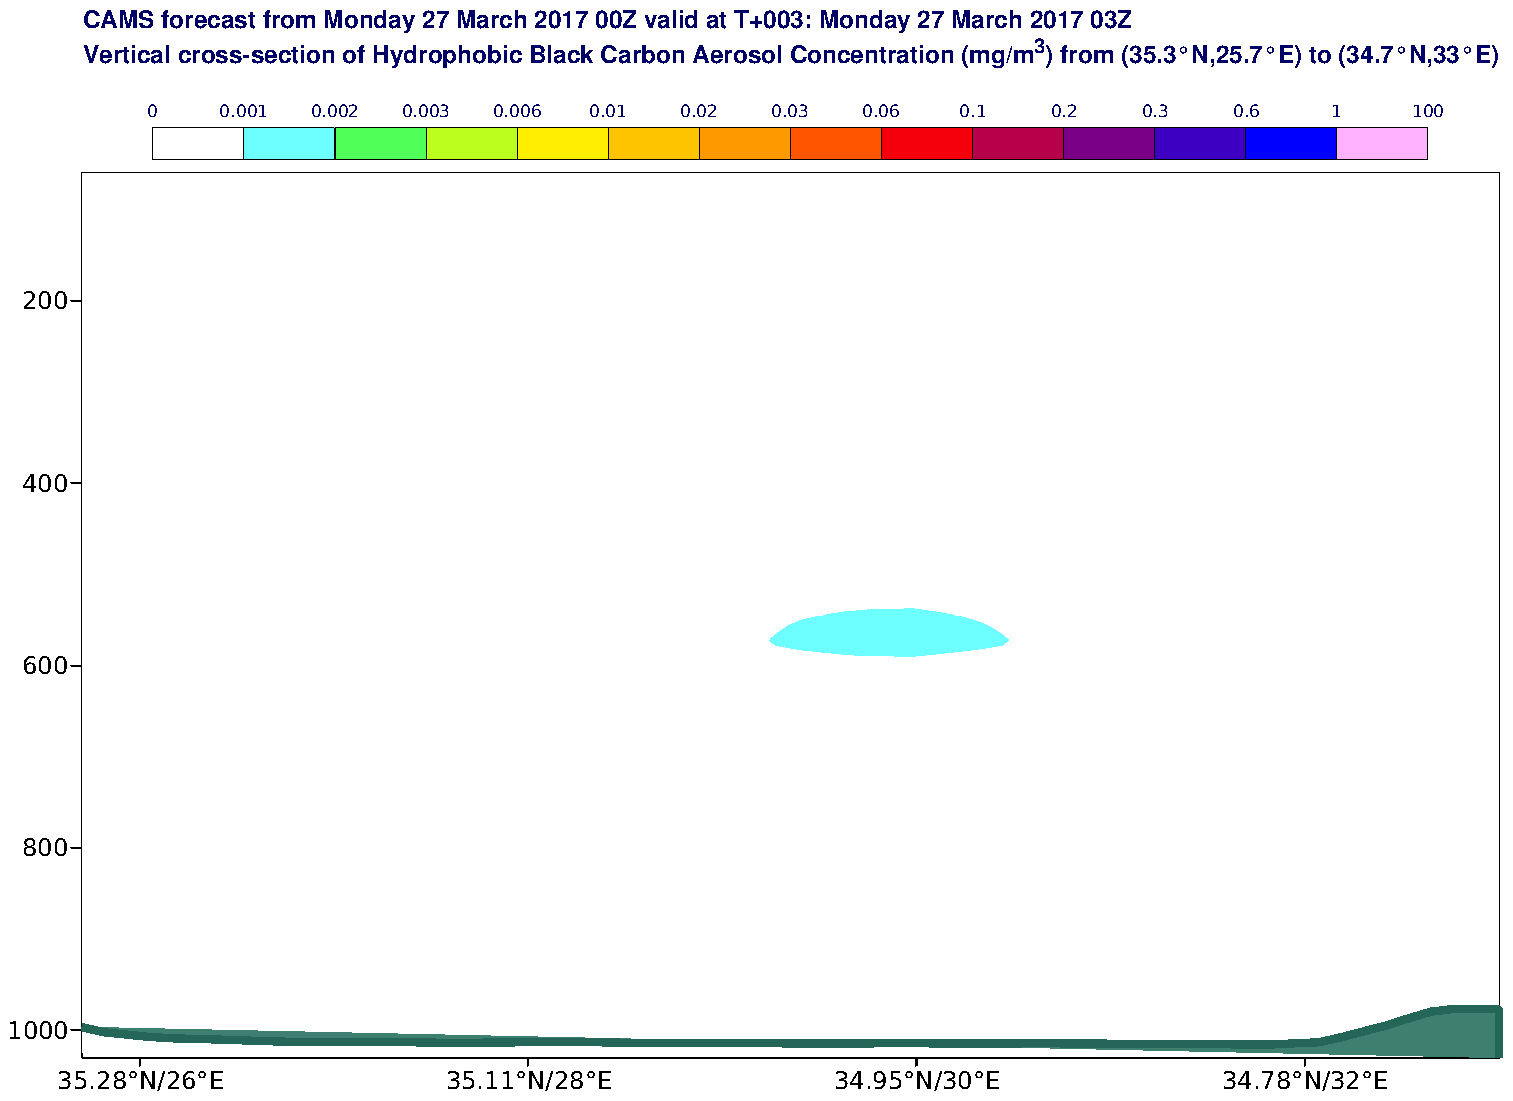 Vertical cross-section of Hydrophobic Black Carbon Aerosol Concentration (mg/m3) valid at T3 - 2017-03-27 03:00